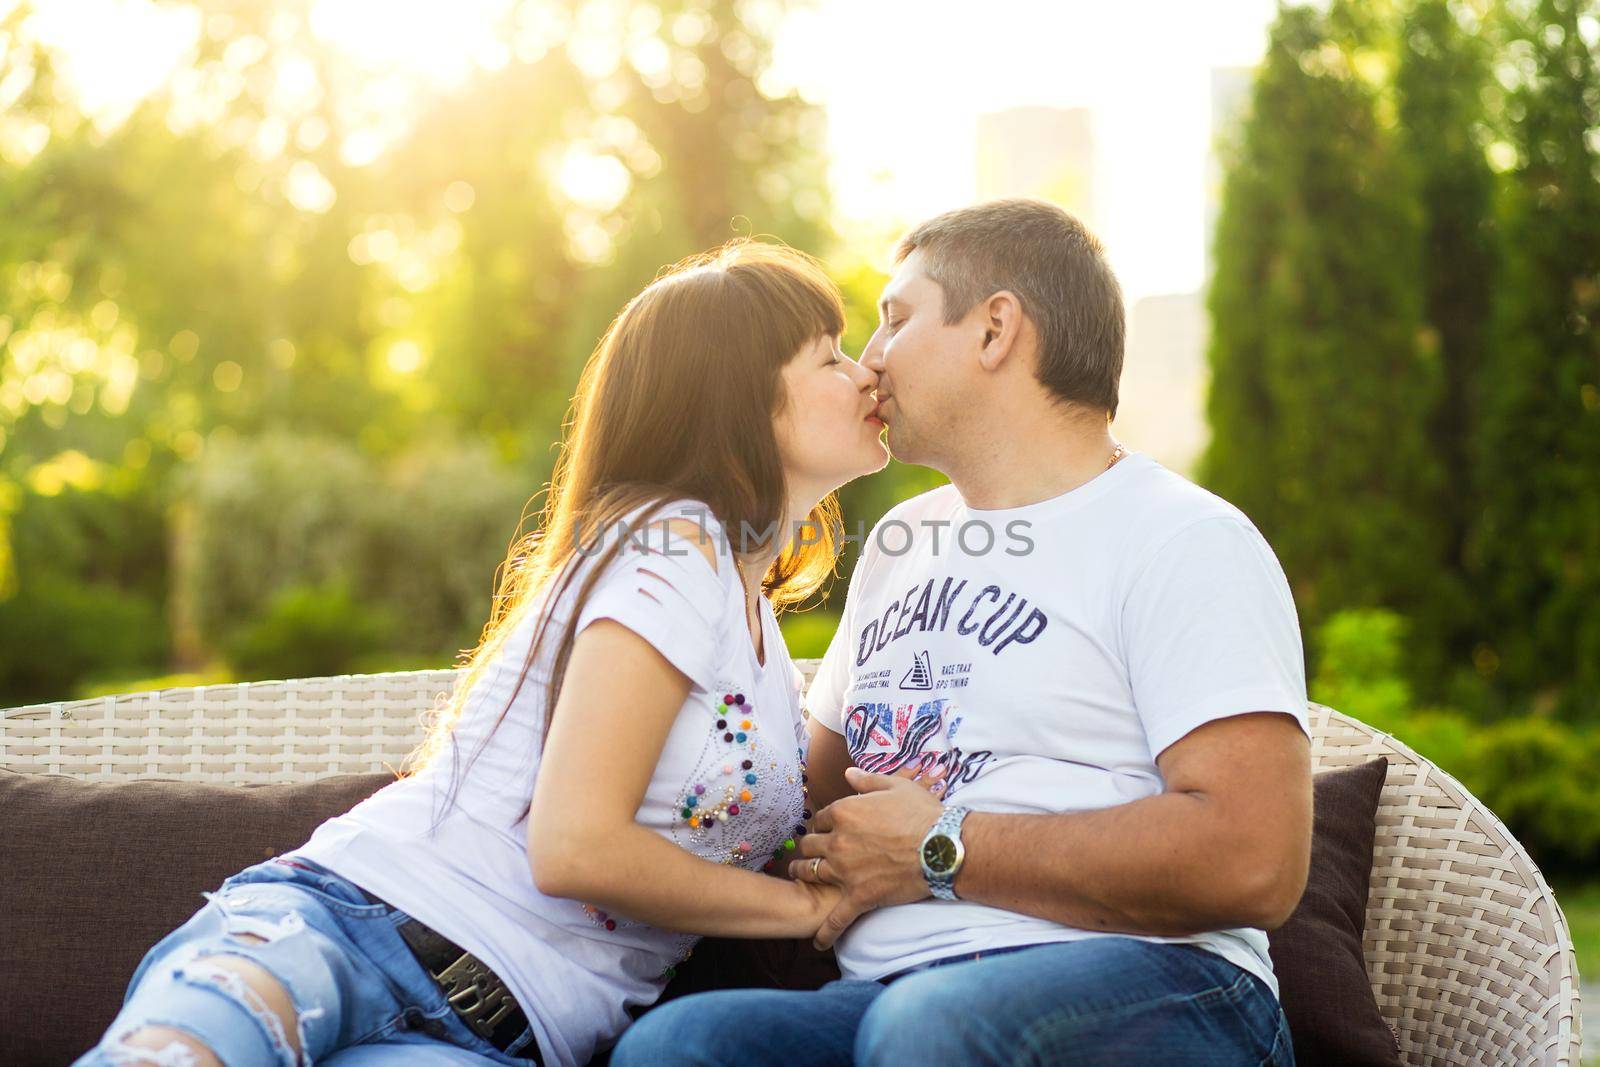 Young romantic couple have fun enjoy each other on the bench in green summer park.